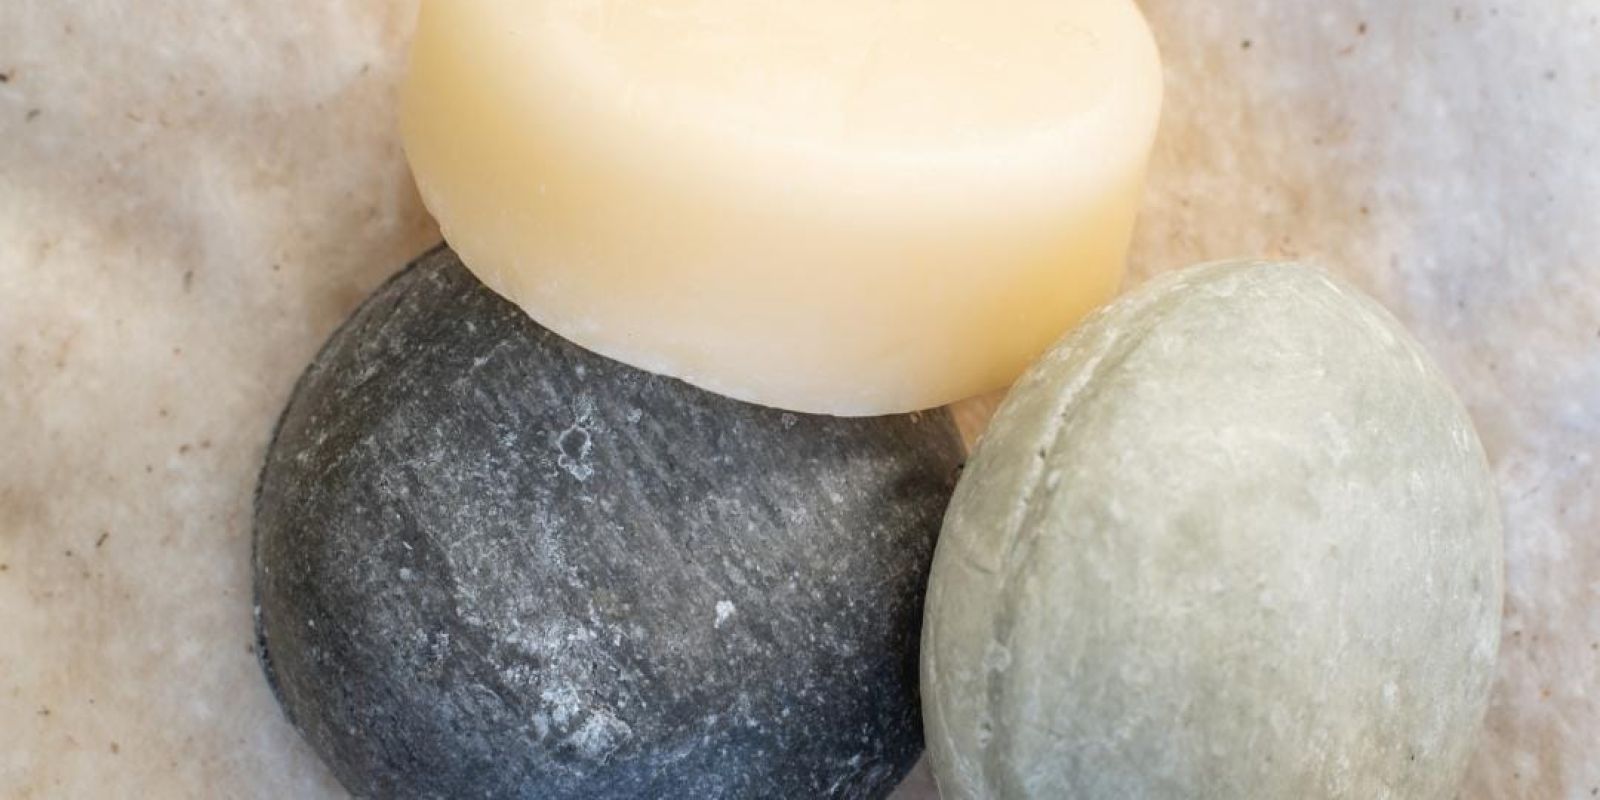 Why Shampoo Bars Might NOT Work For You: And What You Can Do About It admin ajax.php?action=kernel&p=image&src=%7B%22file%22%3A%22wp content%2Fuploads%2F2023%2F04%2FWhatsApp Image 2023 04 17 at 23.37.05